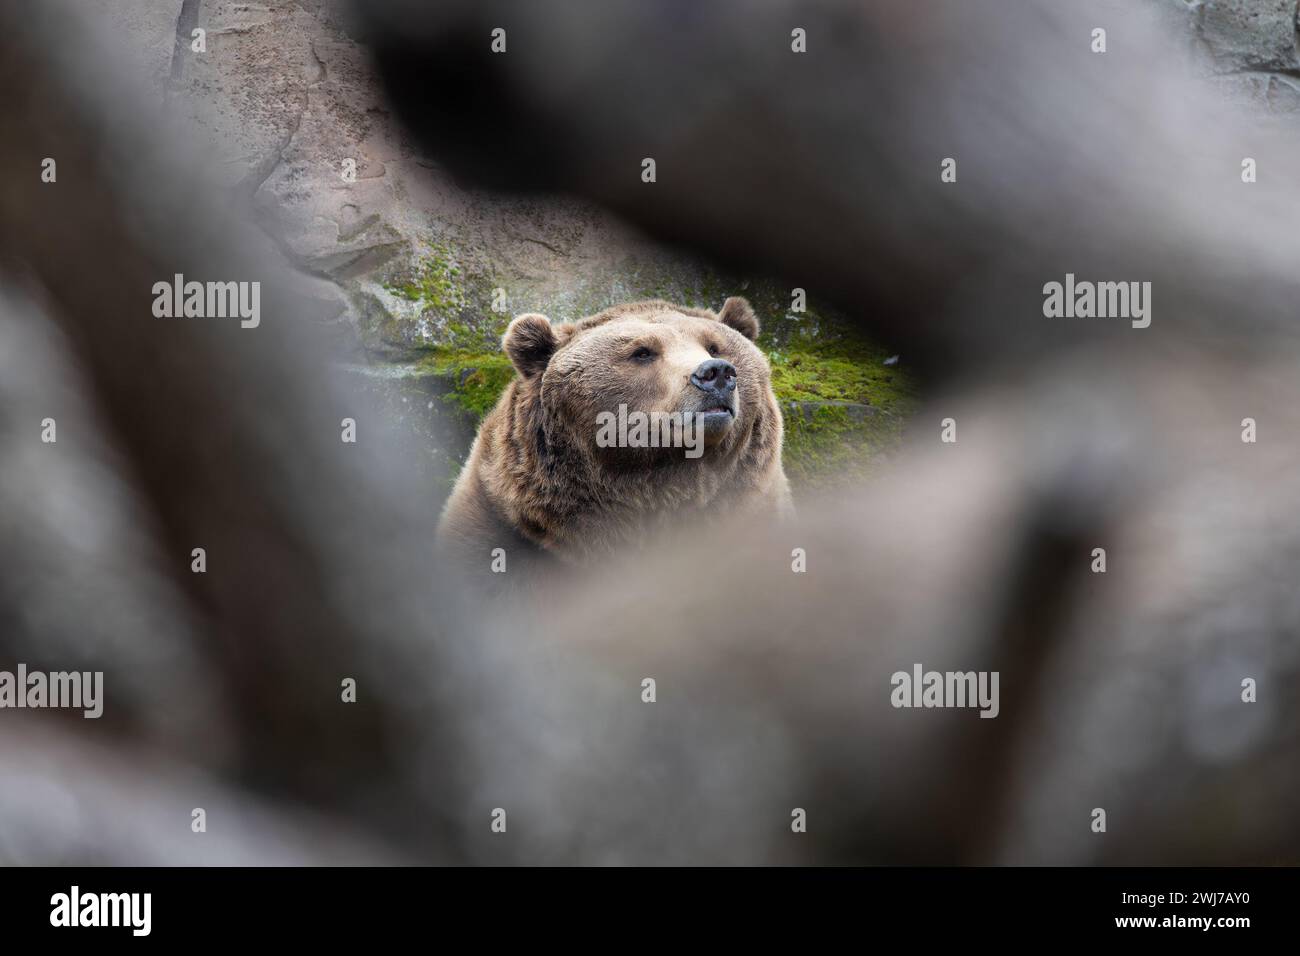 The Brown Bear (Ursus arctos) is a large carnivore found across Eurasia and North America, recognized for its immense size and powerful presence. Stock Photo